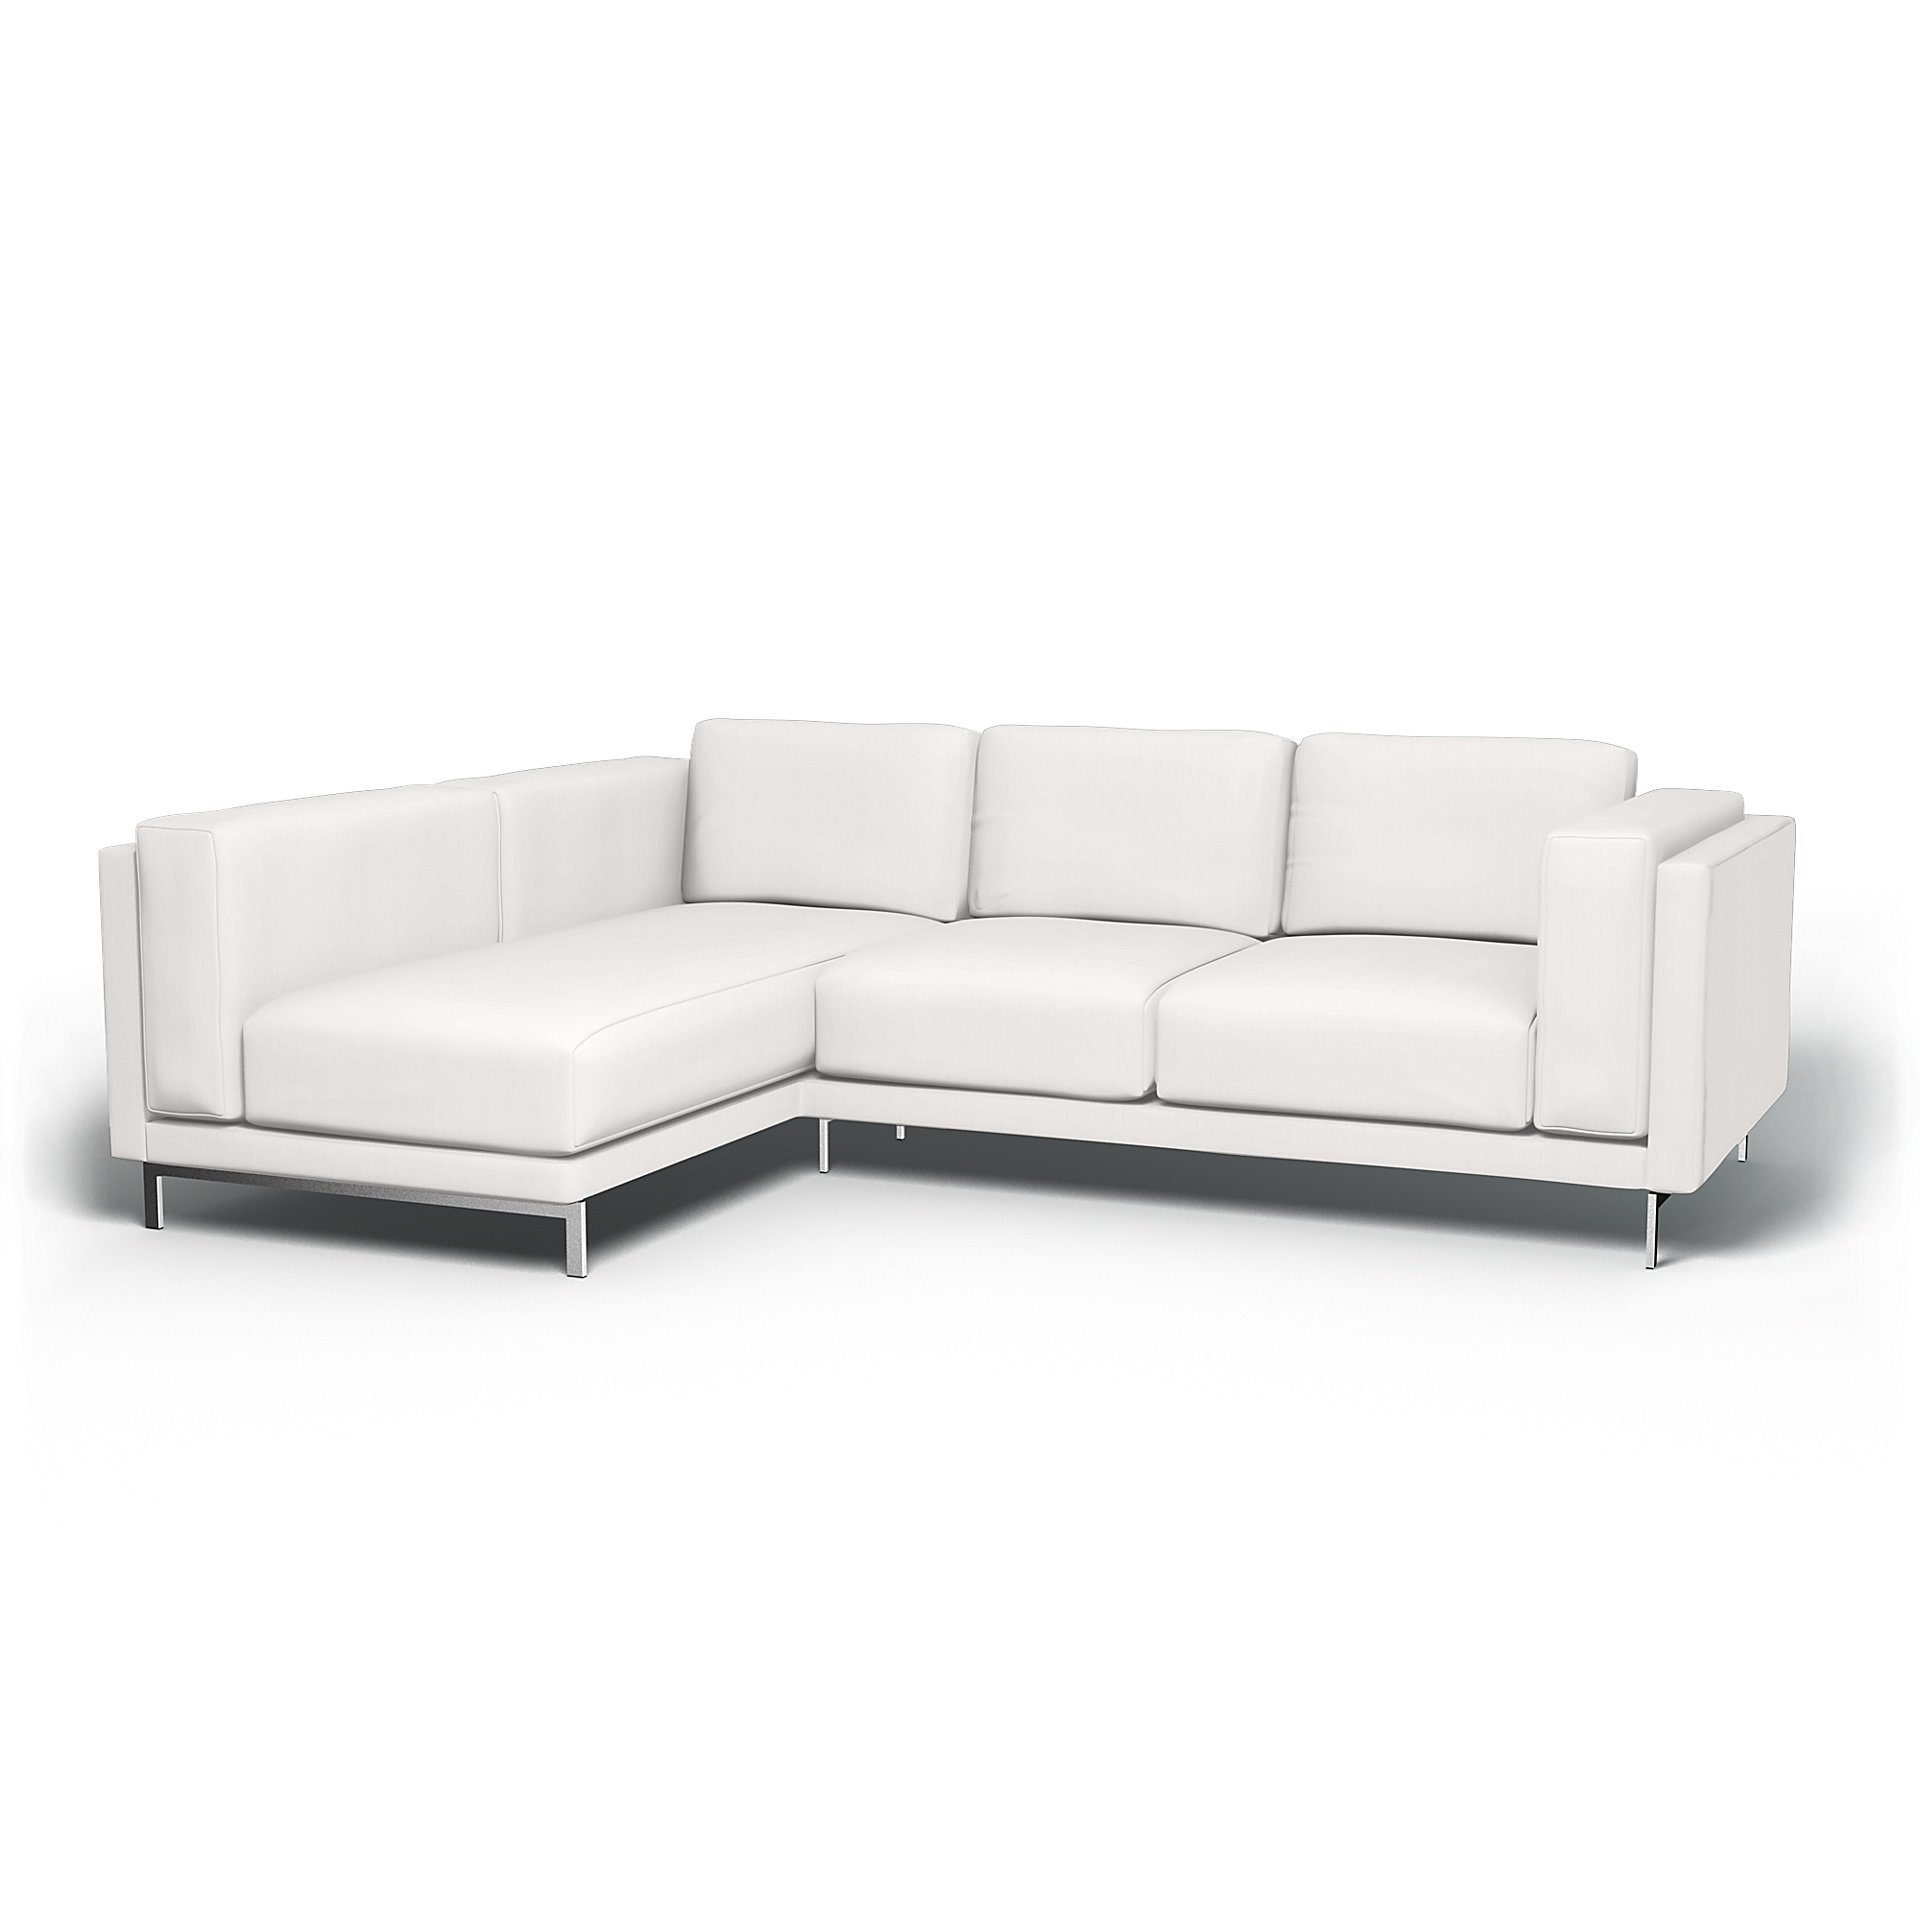 IKEA - Nockeby 3 Seater Sofa with Left Chaise Cover, Soft White, Linen - Bemz